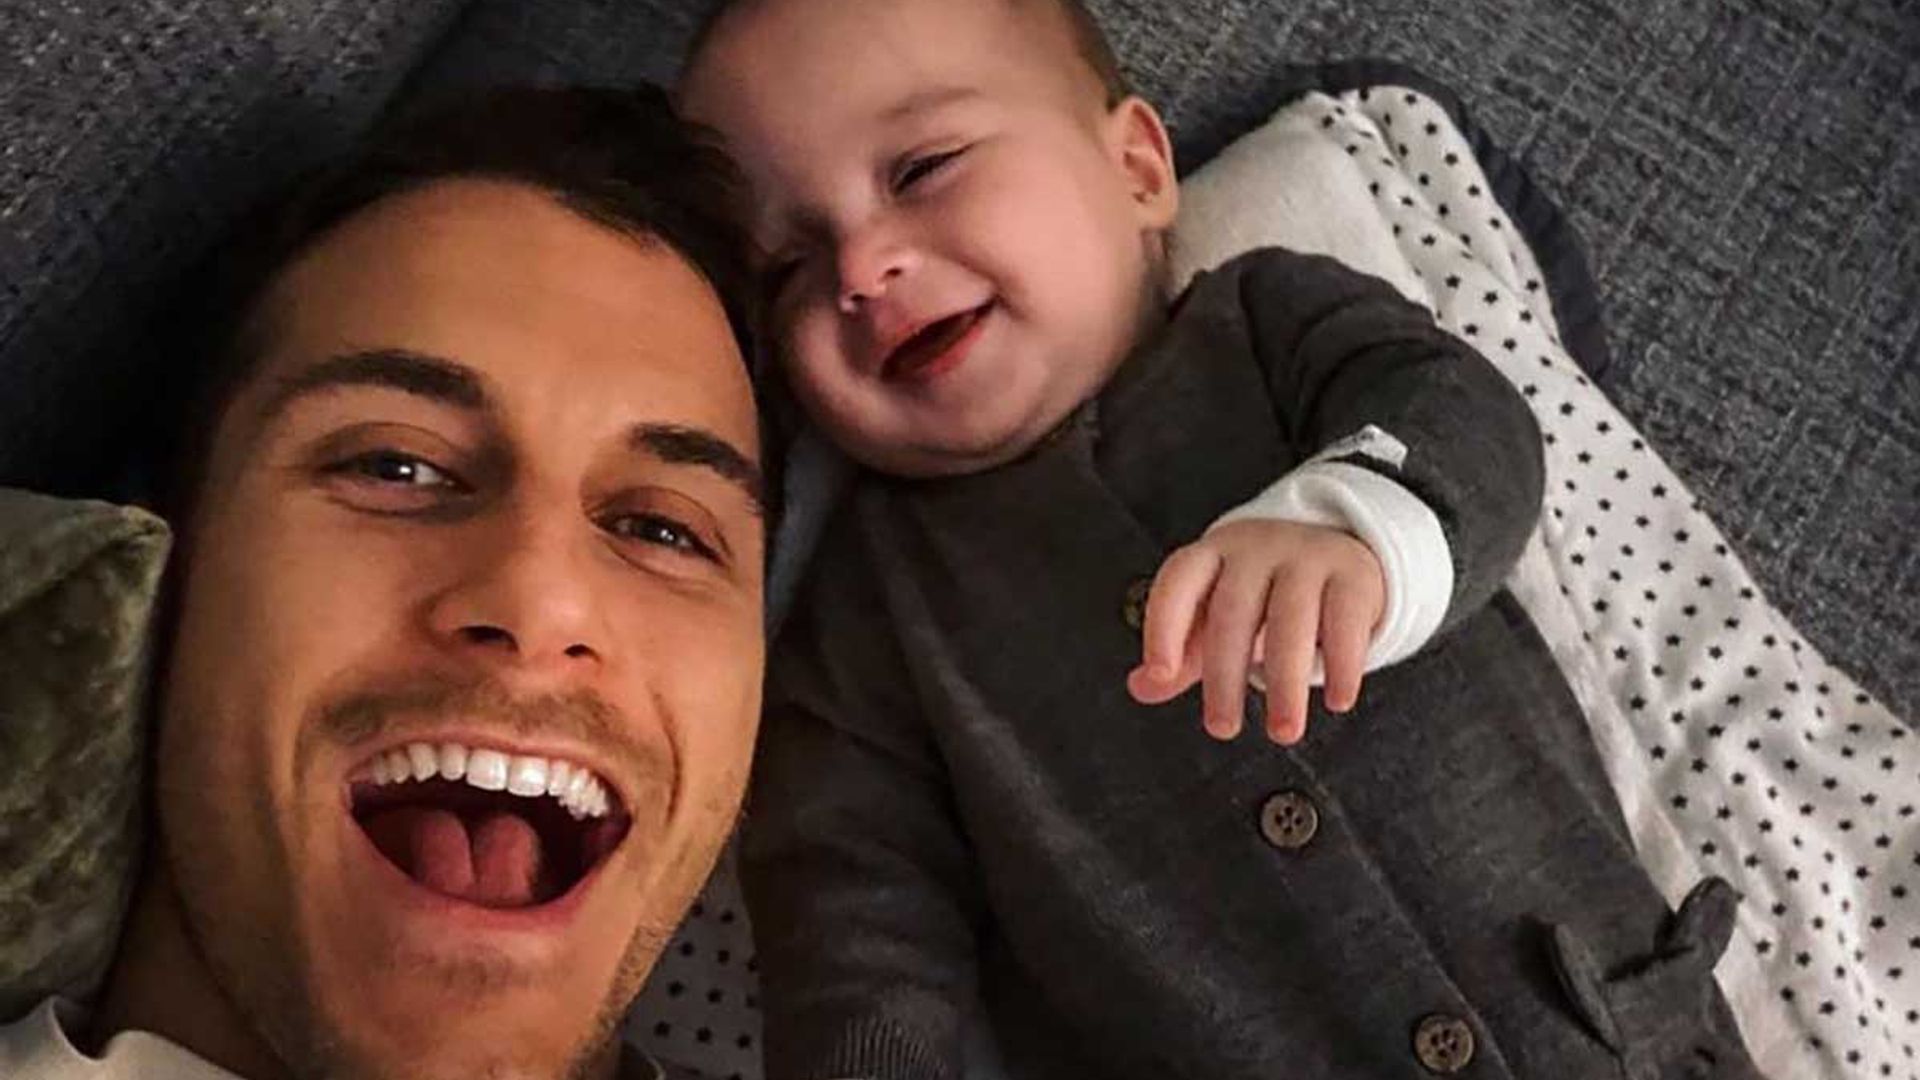 Gemma Atkinson's daughter Mia is just like her dad Gorka Marquez in cute new video